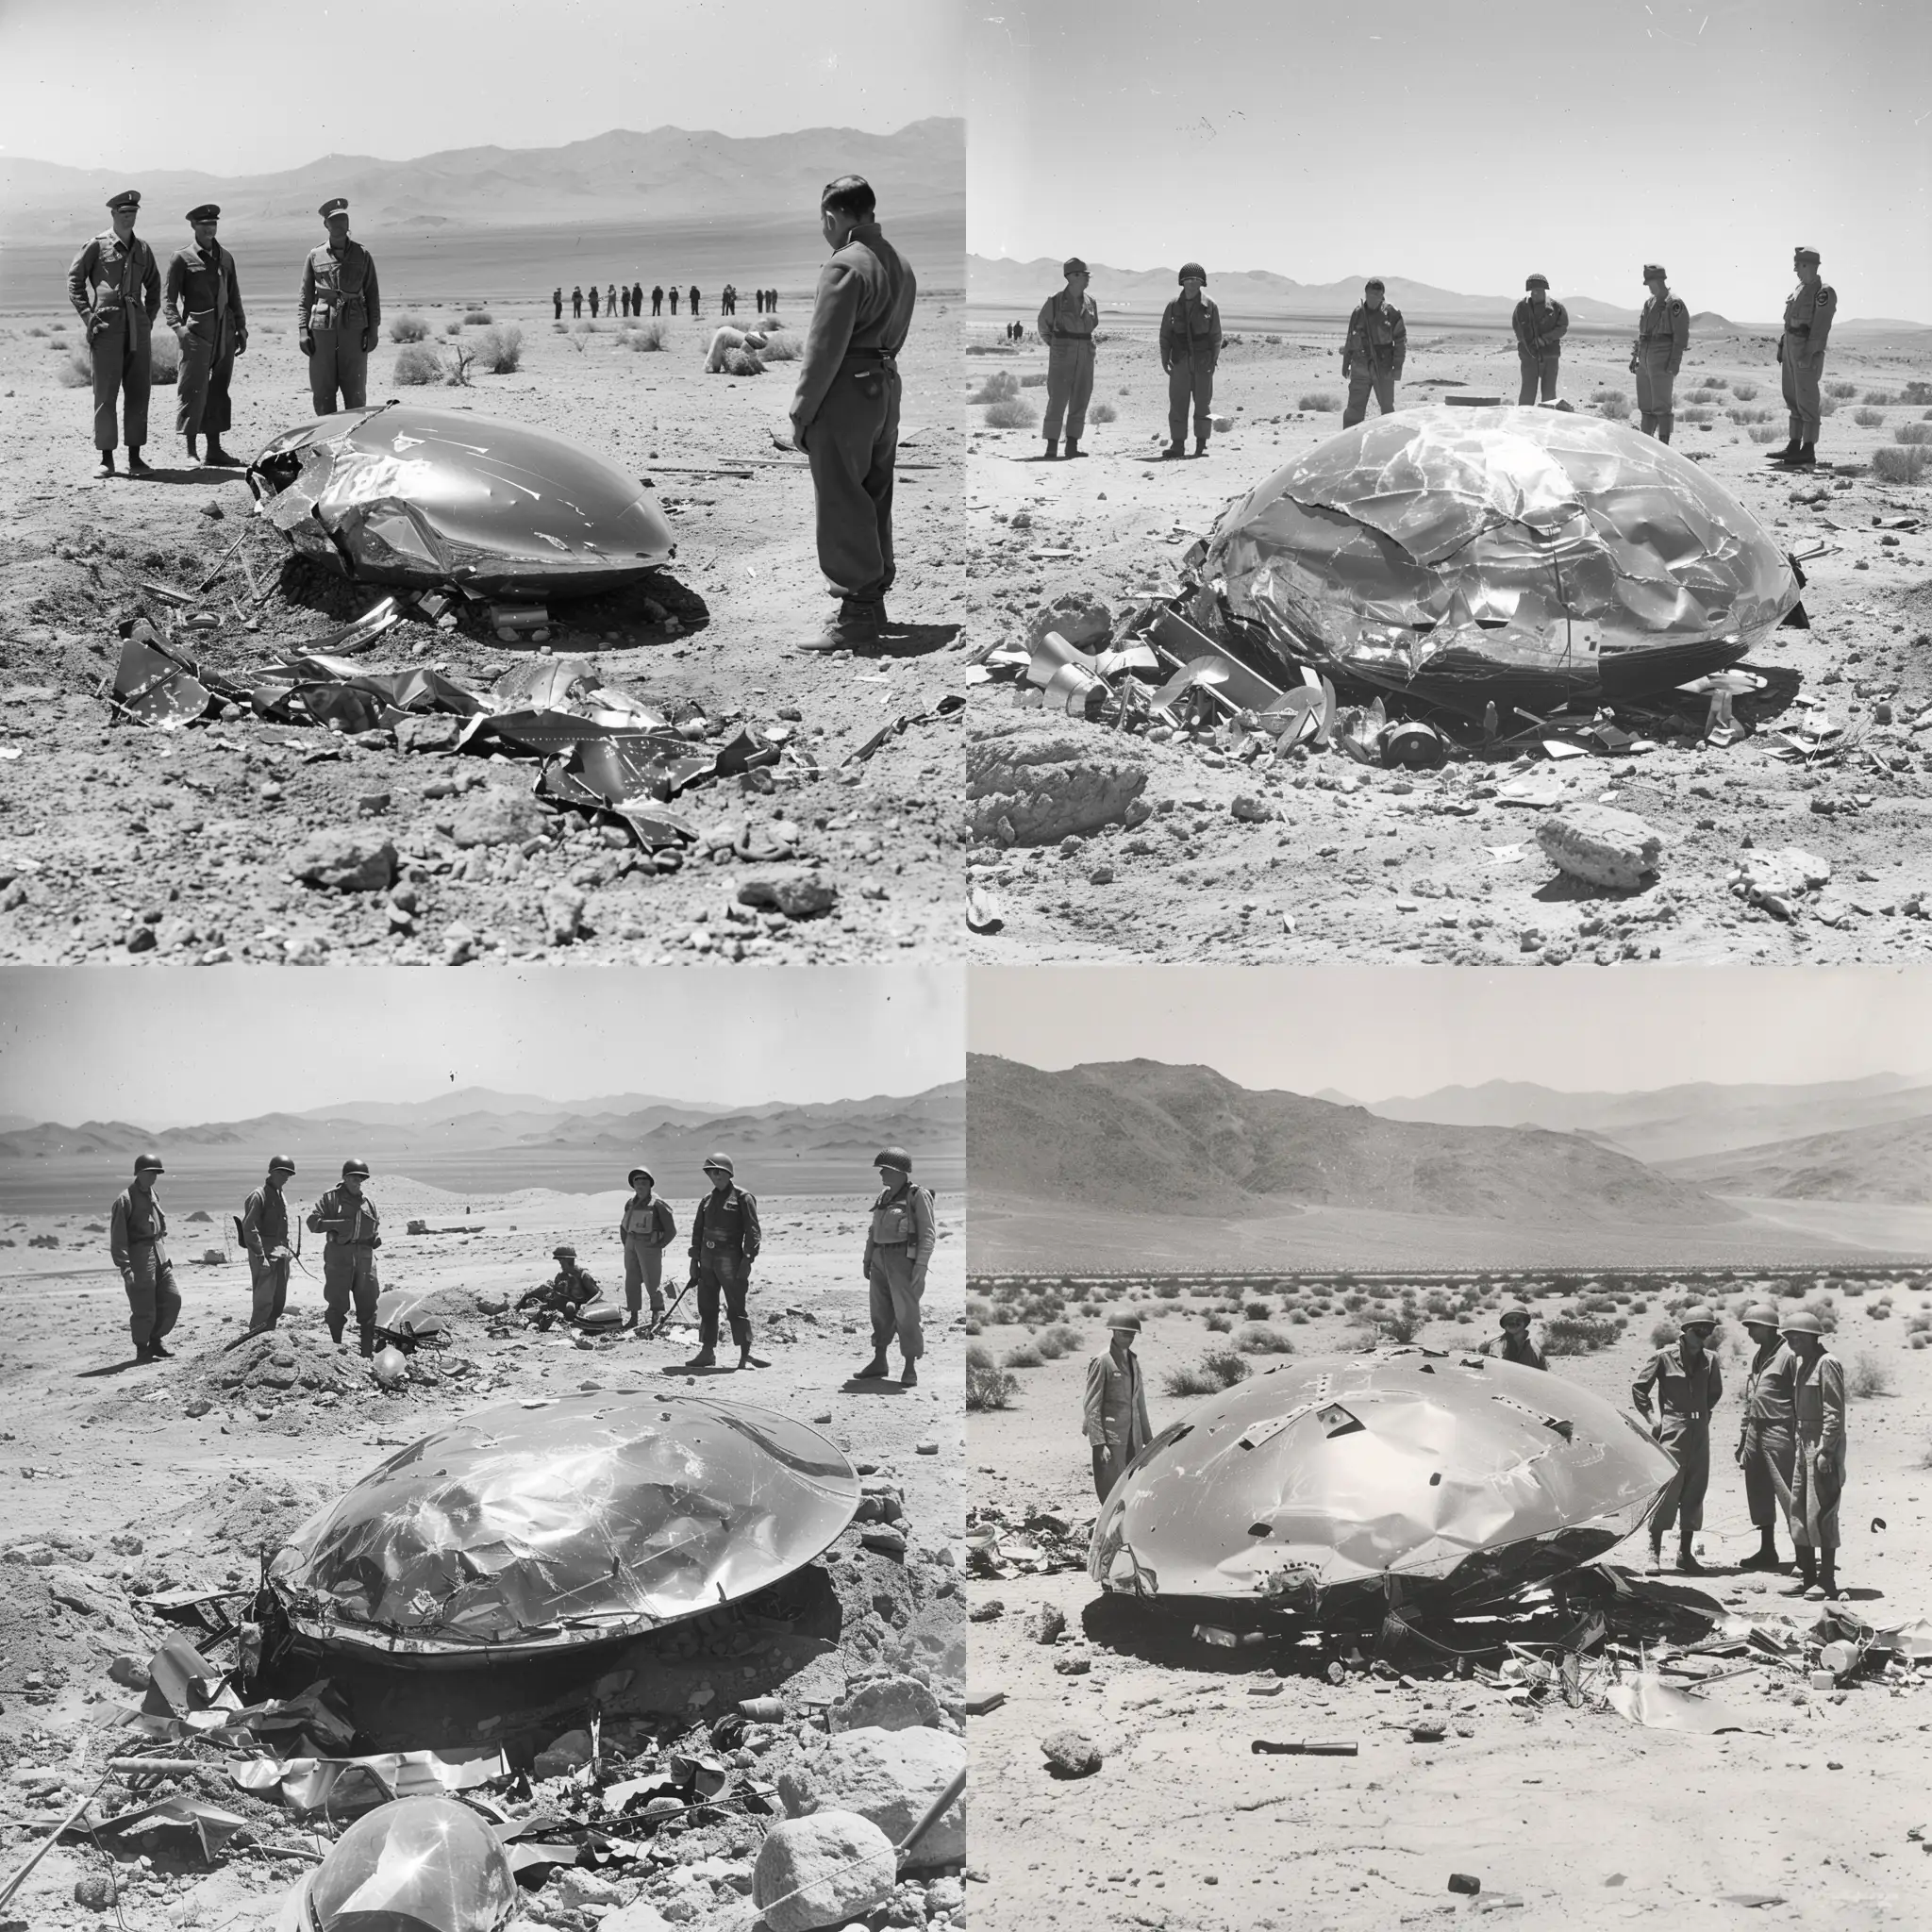 Shiny metallic Flying saucer crash debris field in desert, black & white photo from 1947, with soldiers and scientists standing around, 